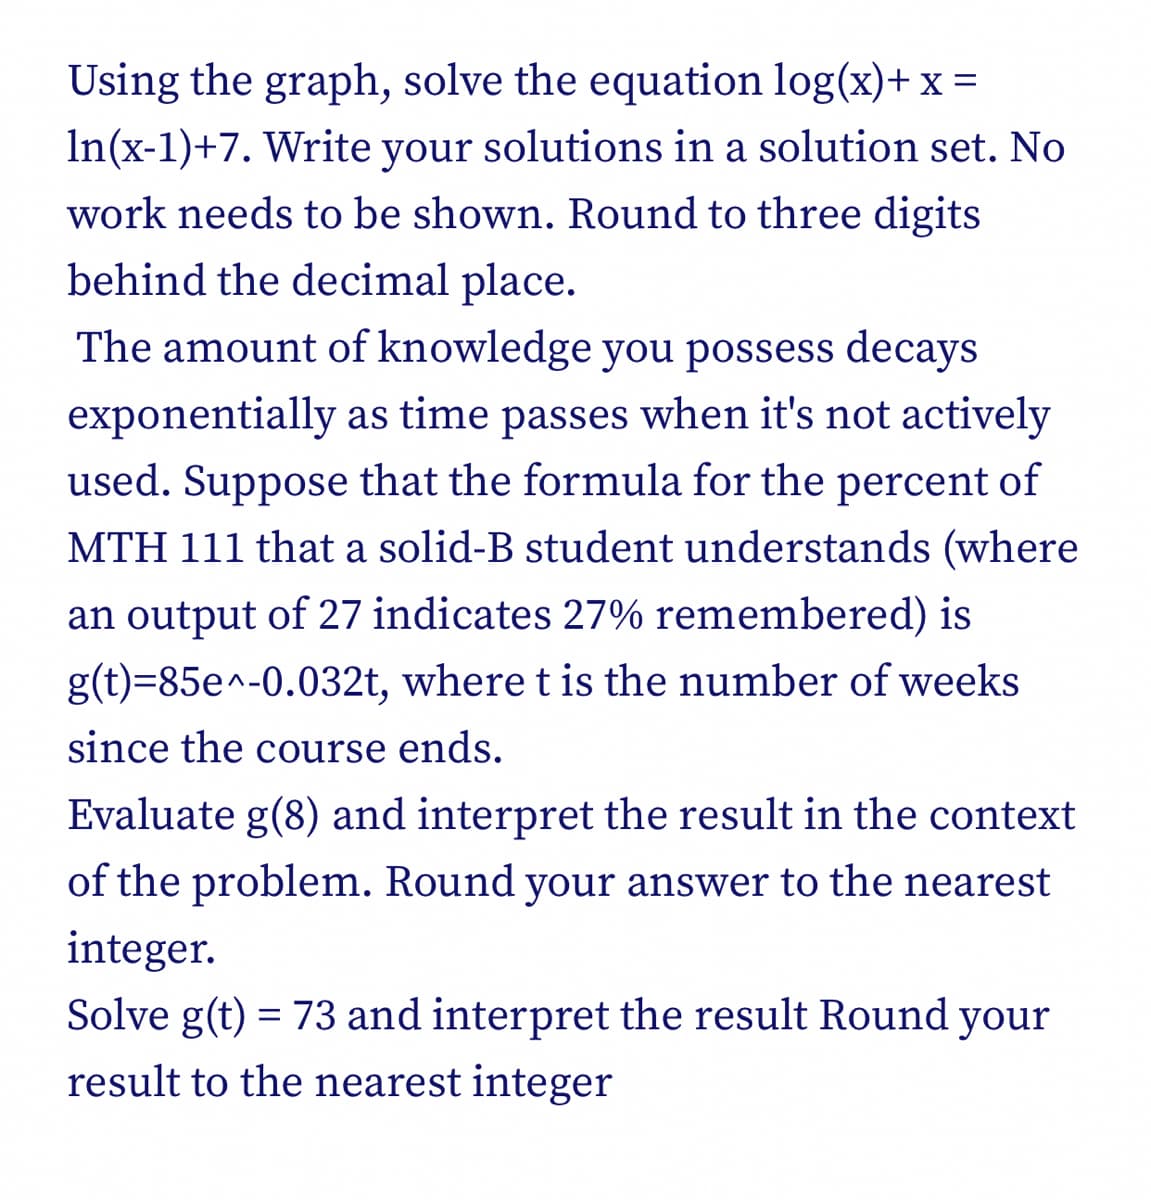 Using the graph, solve the equation log(x)+ x =
In(x-1)+7. Write your solutions in a solution set. No
work needs to be shown. Round to three digits
behind the decimal place.
The amount of knowledge you possess decays
exponentially as time passes when it's not actively
used. Suppose that the formula for the percent of
MTH 111 that a solid-B student understands (where
an output of 27 indicates 27% remembered) is
g(t)=85e^-0.032t, where t is the number of weeks
since the course ends.
Evaluate g(8) and interpret the result in the context
of the problem. Round your answer to the nearest
integer.
Solve g(t) = 73 and interpret the result Round your
result to the nearest integer
